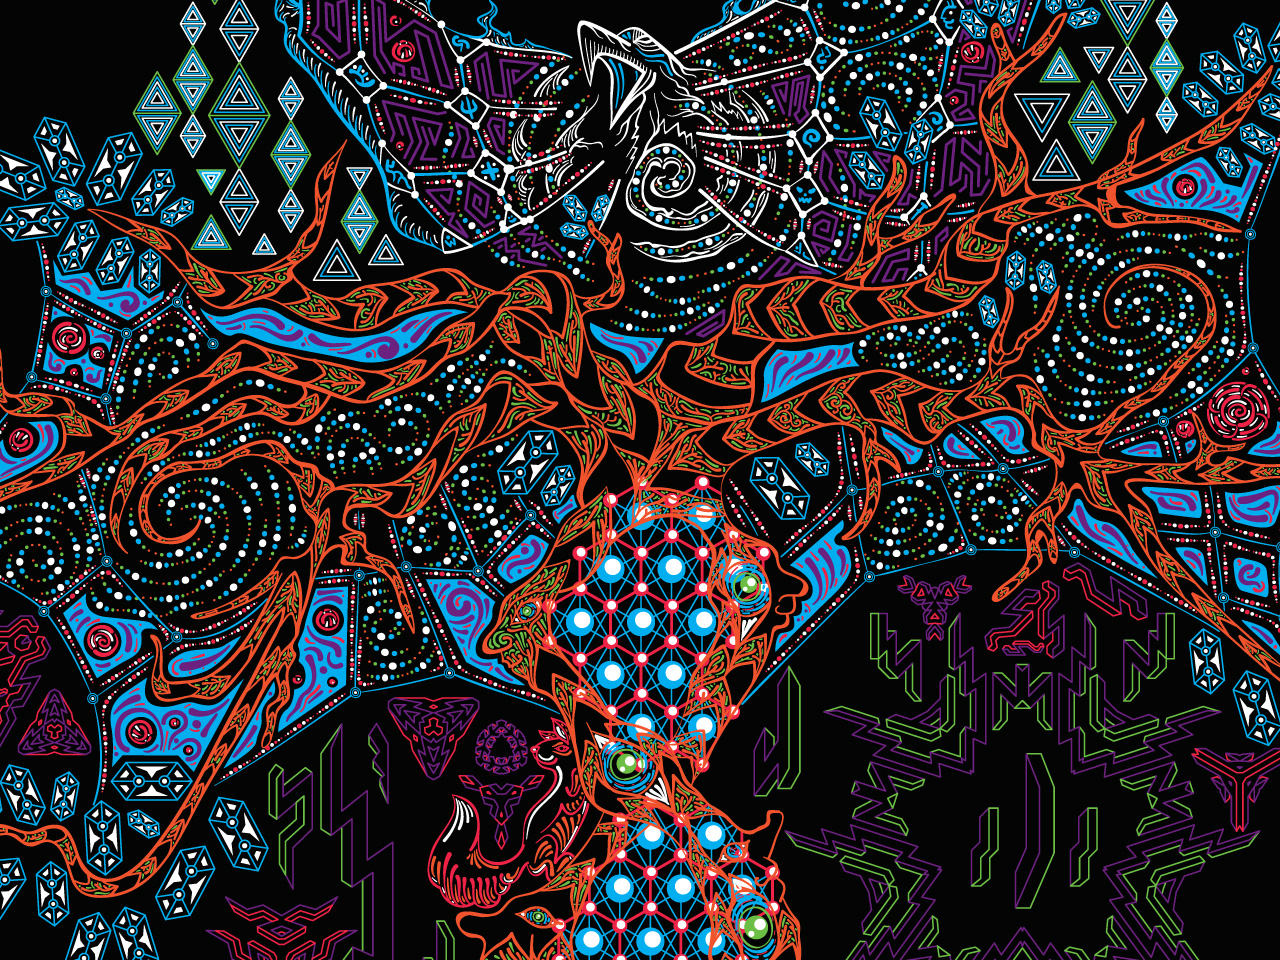 Psychedelic Yggdrasil the Tree of Life free wallpaper by Andrei Verner